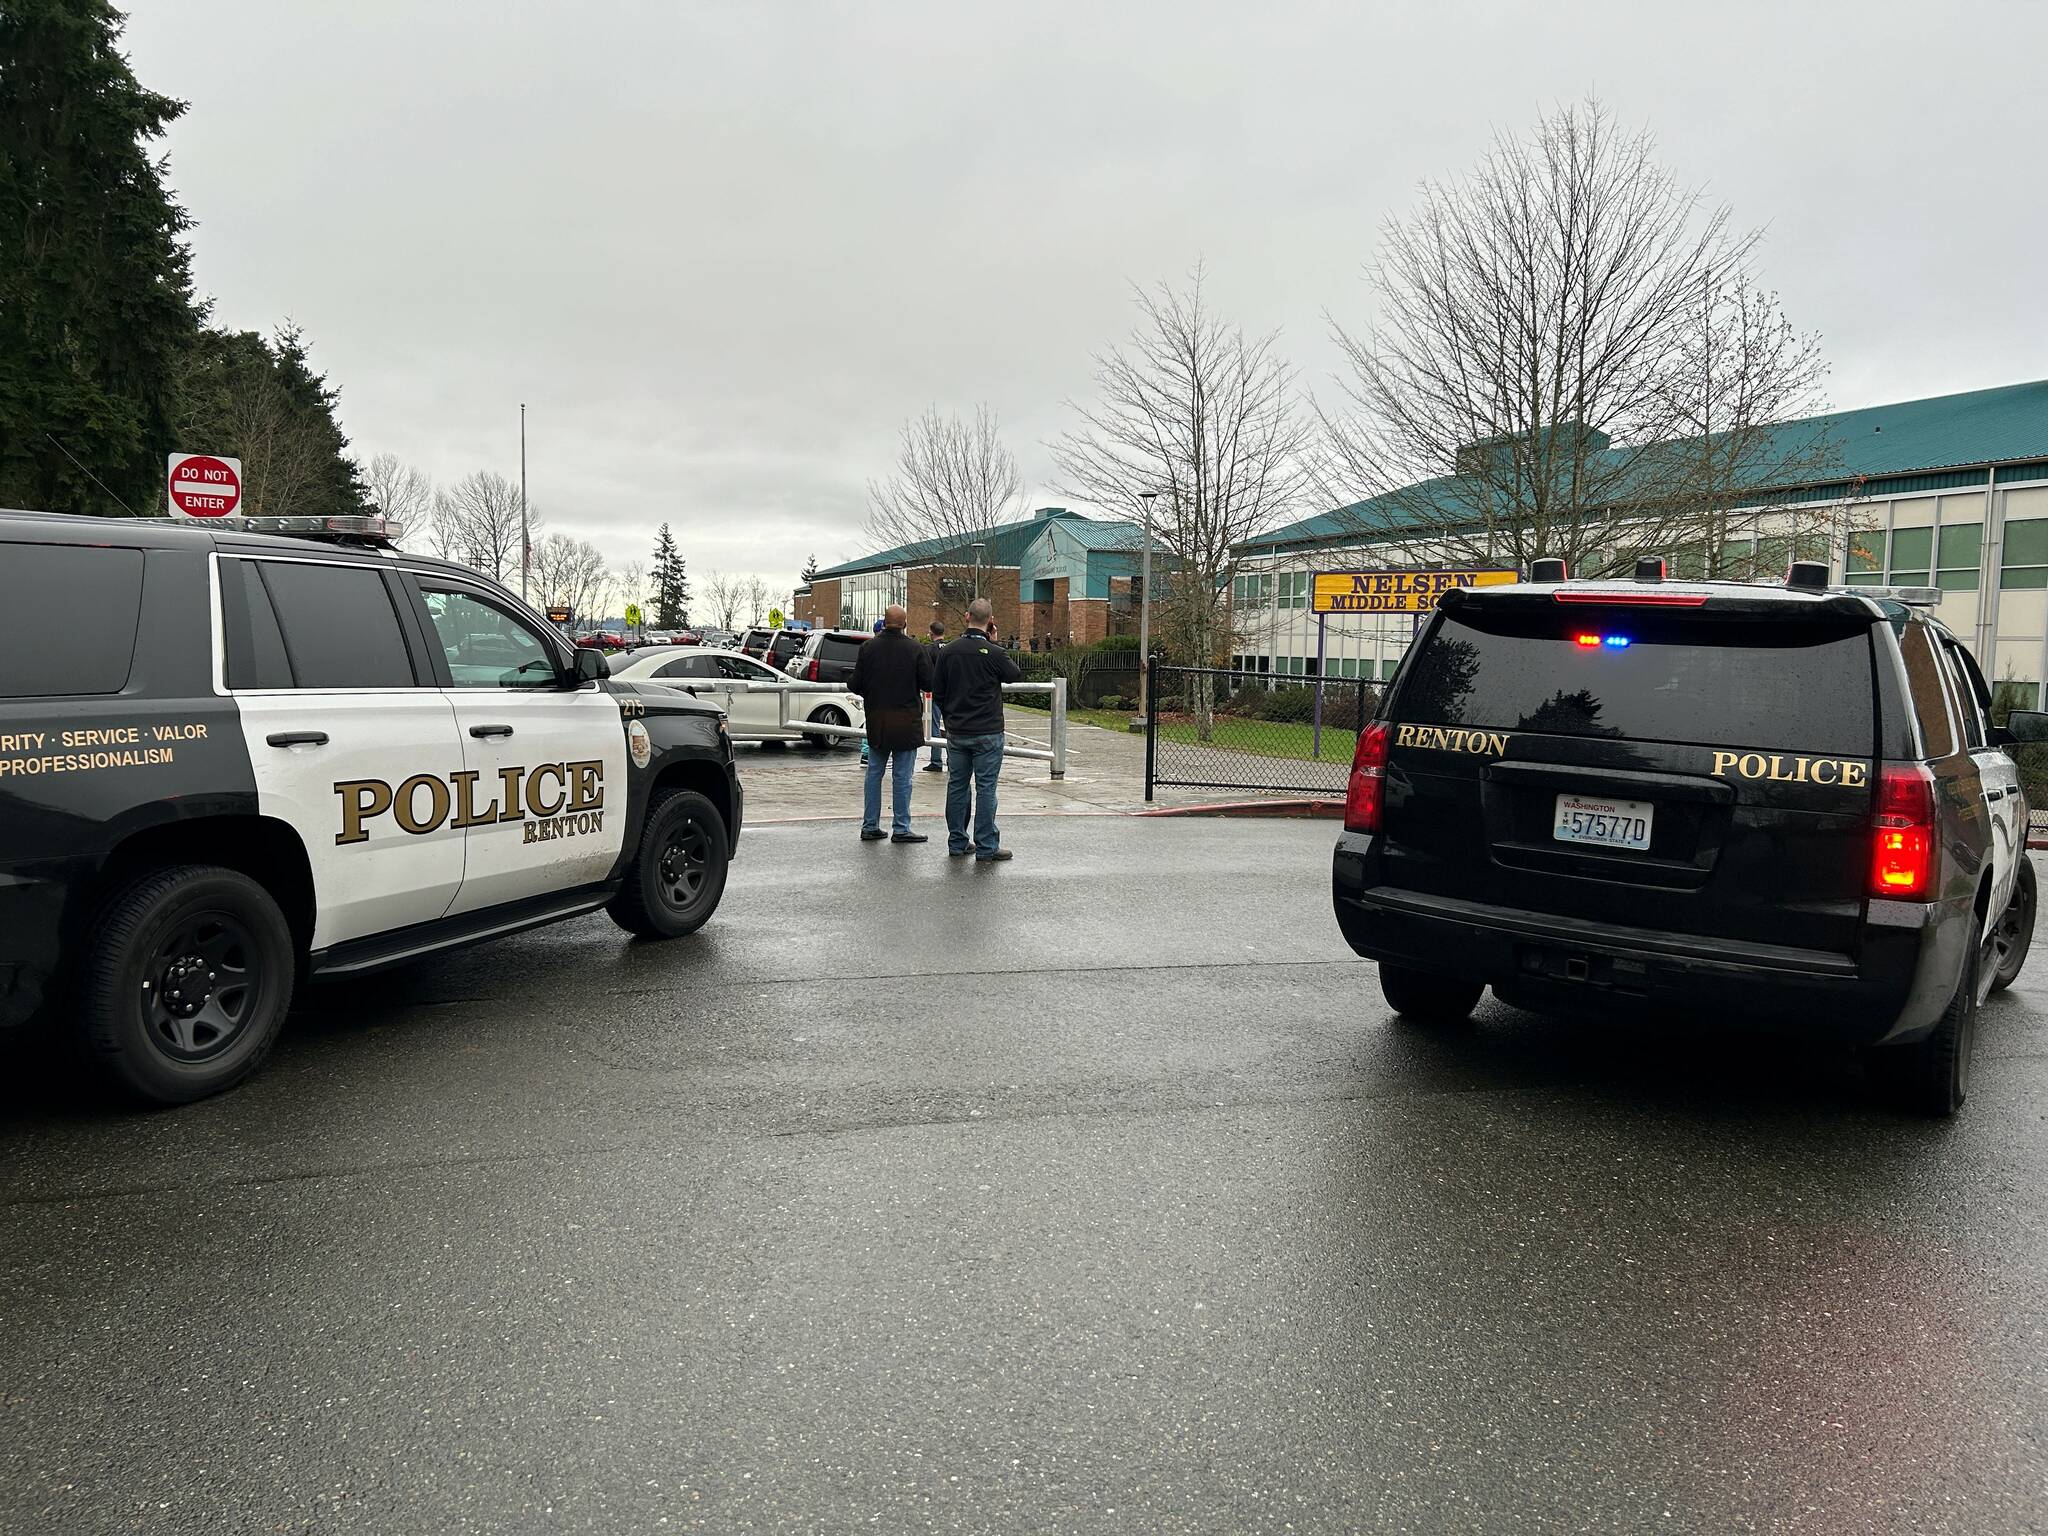 Renton police entered Nelsen Middle School on Dec. 14 after a prank phone call alleged of a firearms threat in the school. (Courtesy of the Renton Police Department.)